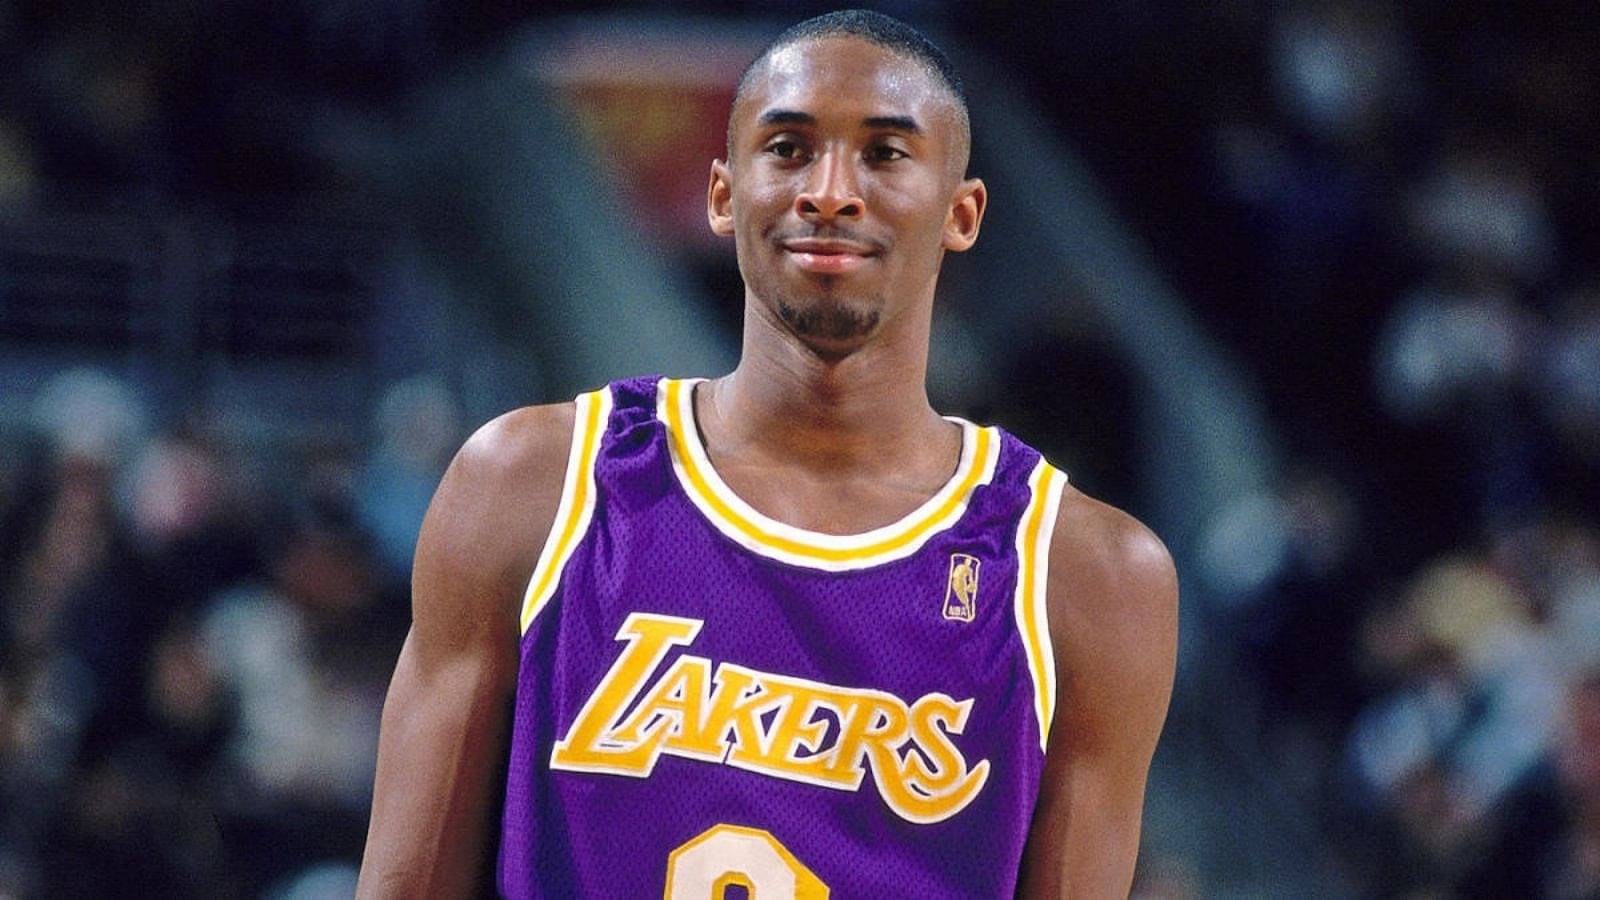 "Knew the janitor, he opened up the gym for me, I was there until sun came up": When Kobe Bryant air-balled 4 shots against the Jazz in a playoffs elimination game and went straight to practice